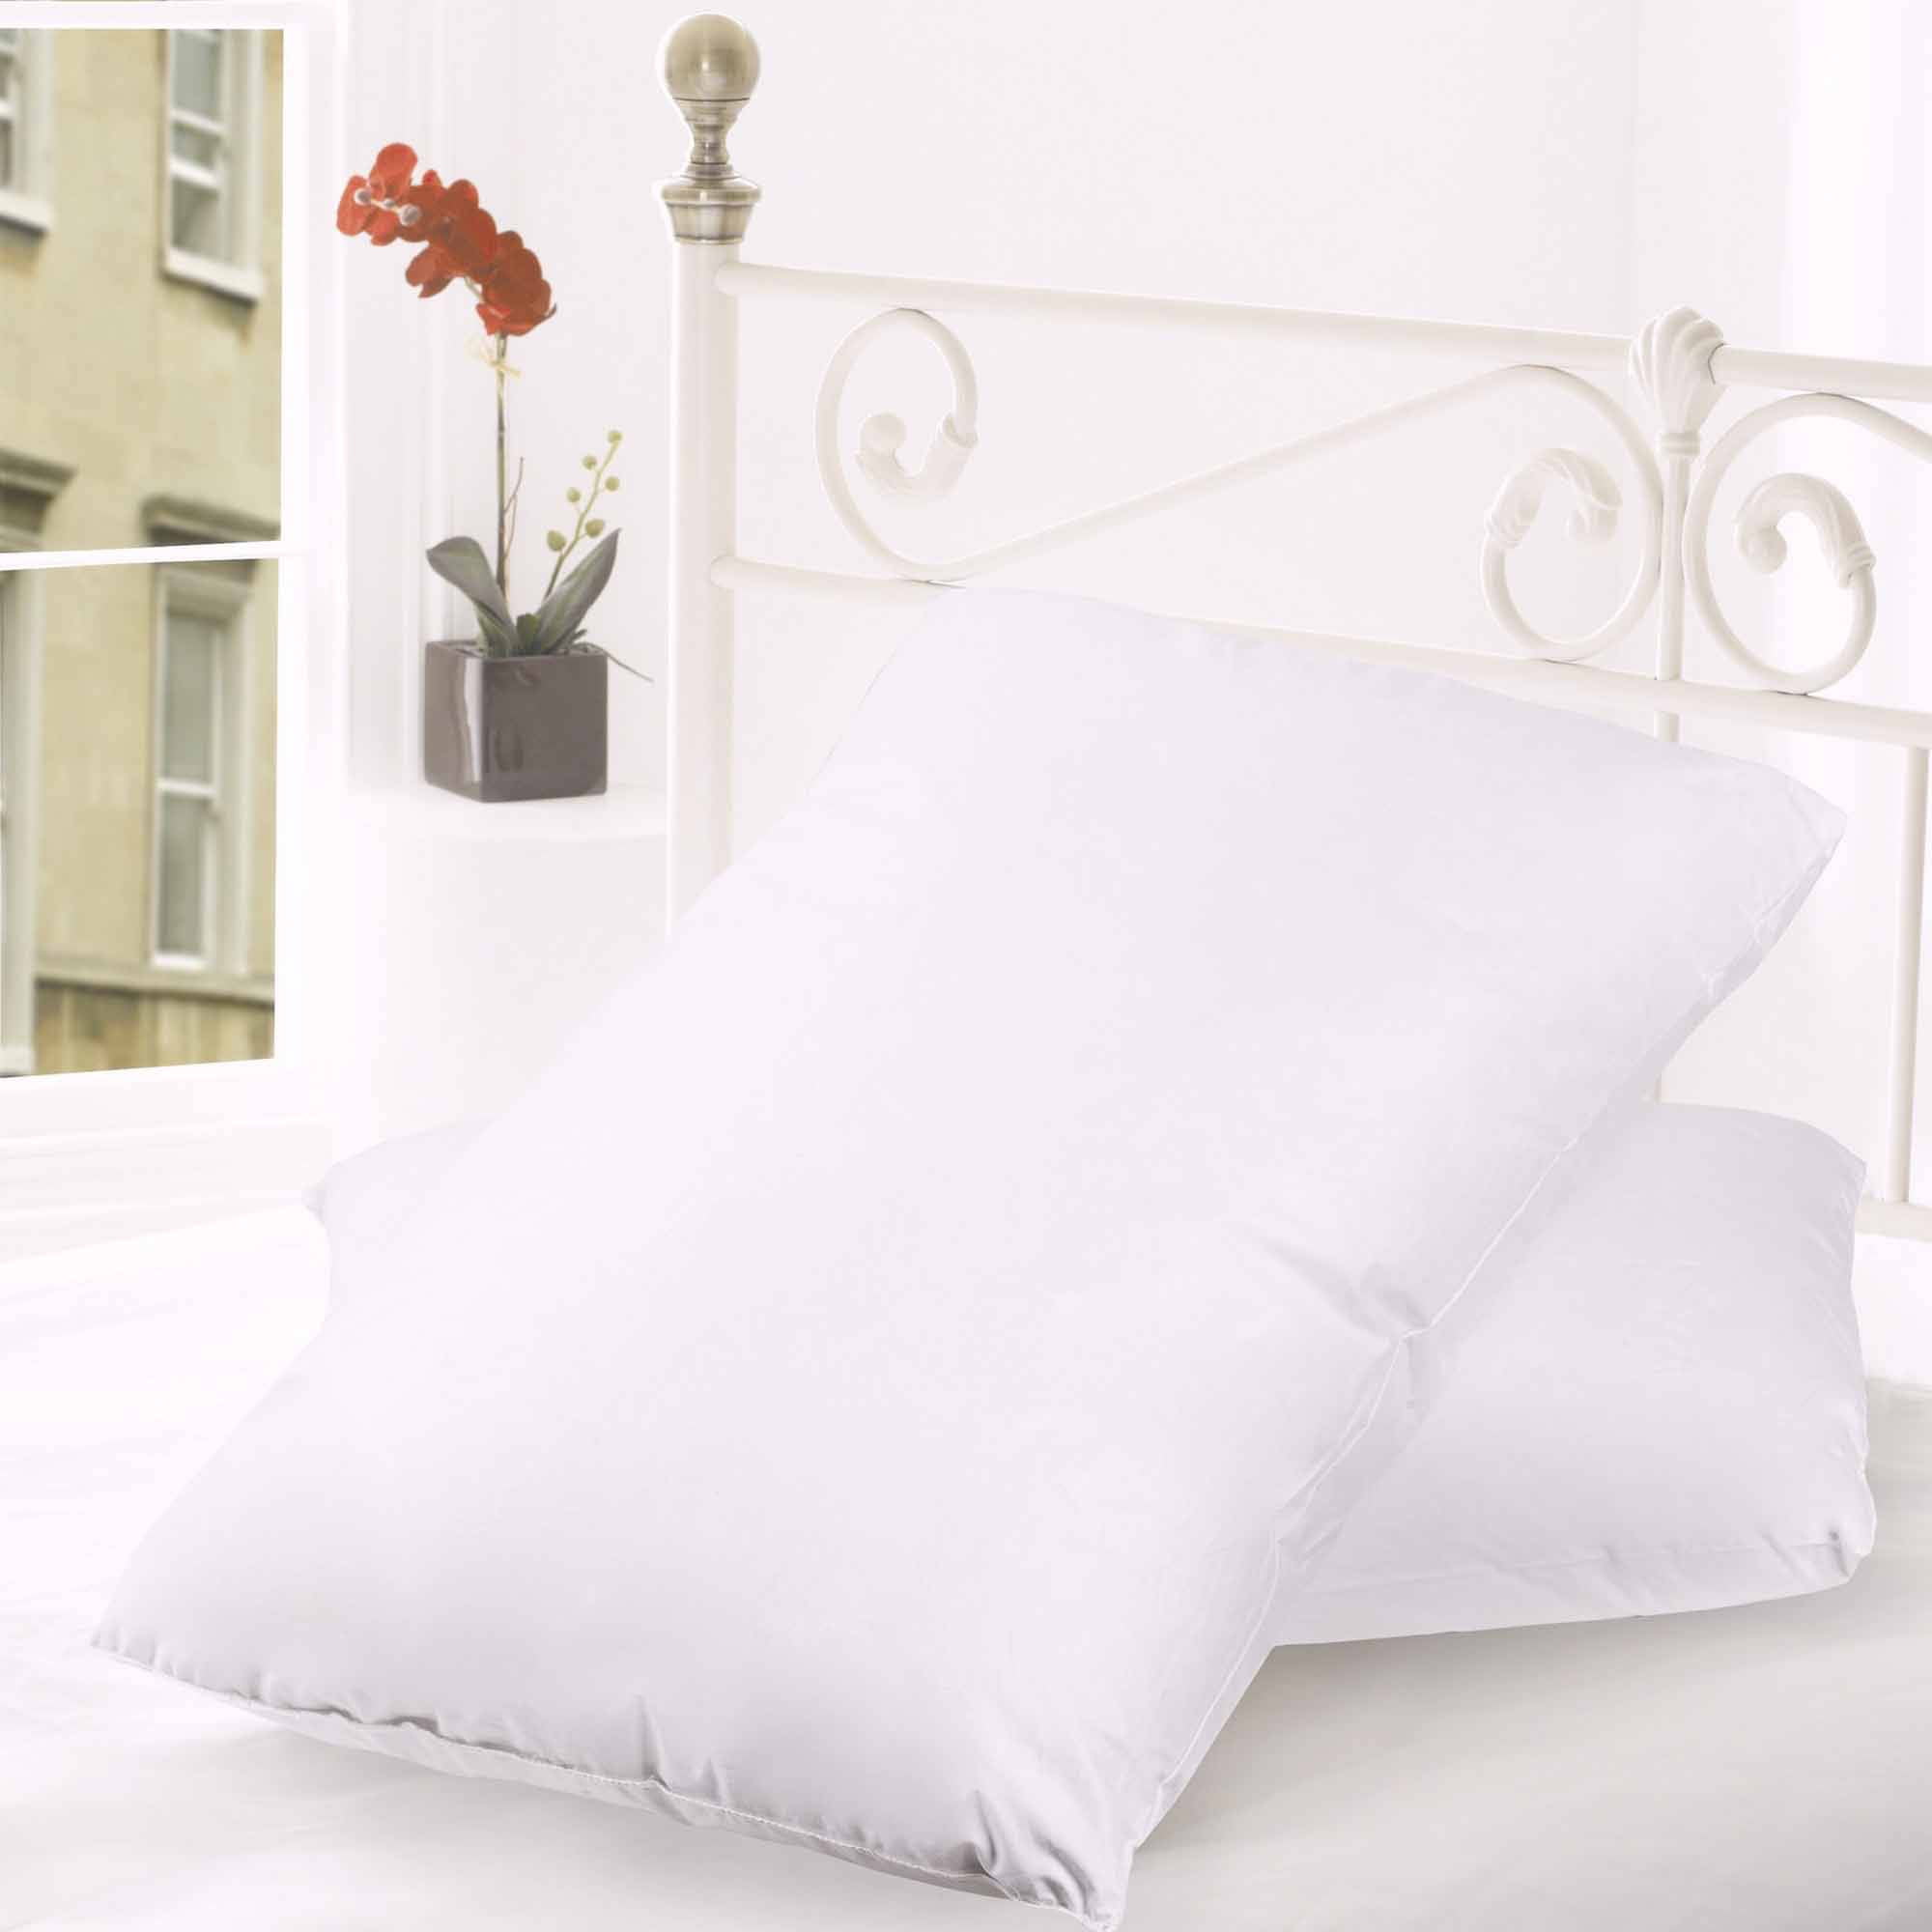 Bed Pillows Feather Down King Size Cotton Cover Luxury Hypoallergenic Duck Fill 